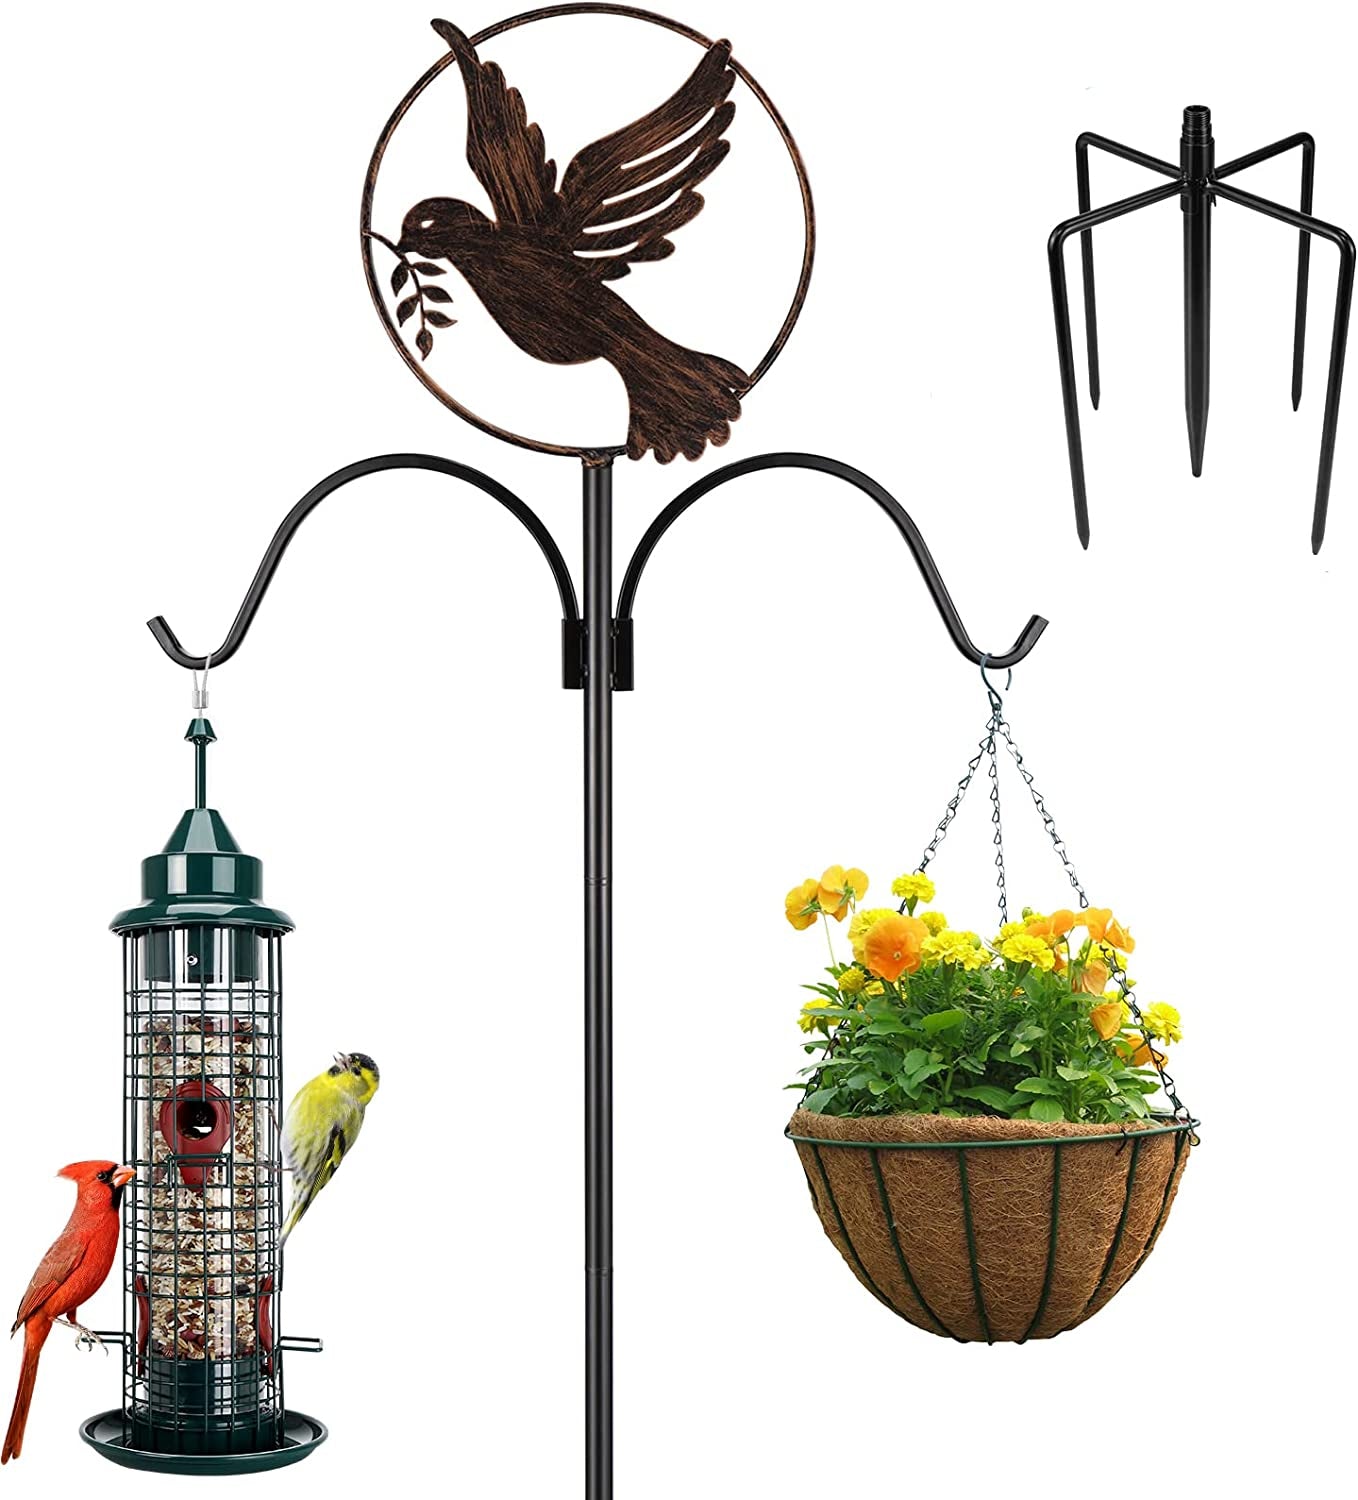 Lupfung, Lupfung Premium Bird Feeding Station, Bird Feeder Pole Multi Bird Feeder Hanging Kit Stand for outside Attracting Wild Birds, Improved 5-Prong Base Design (Black A)